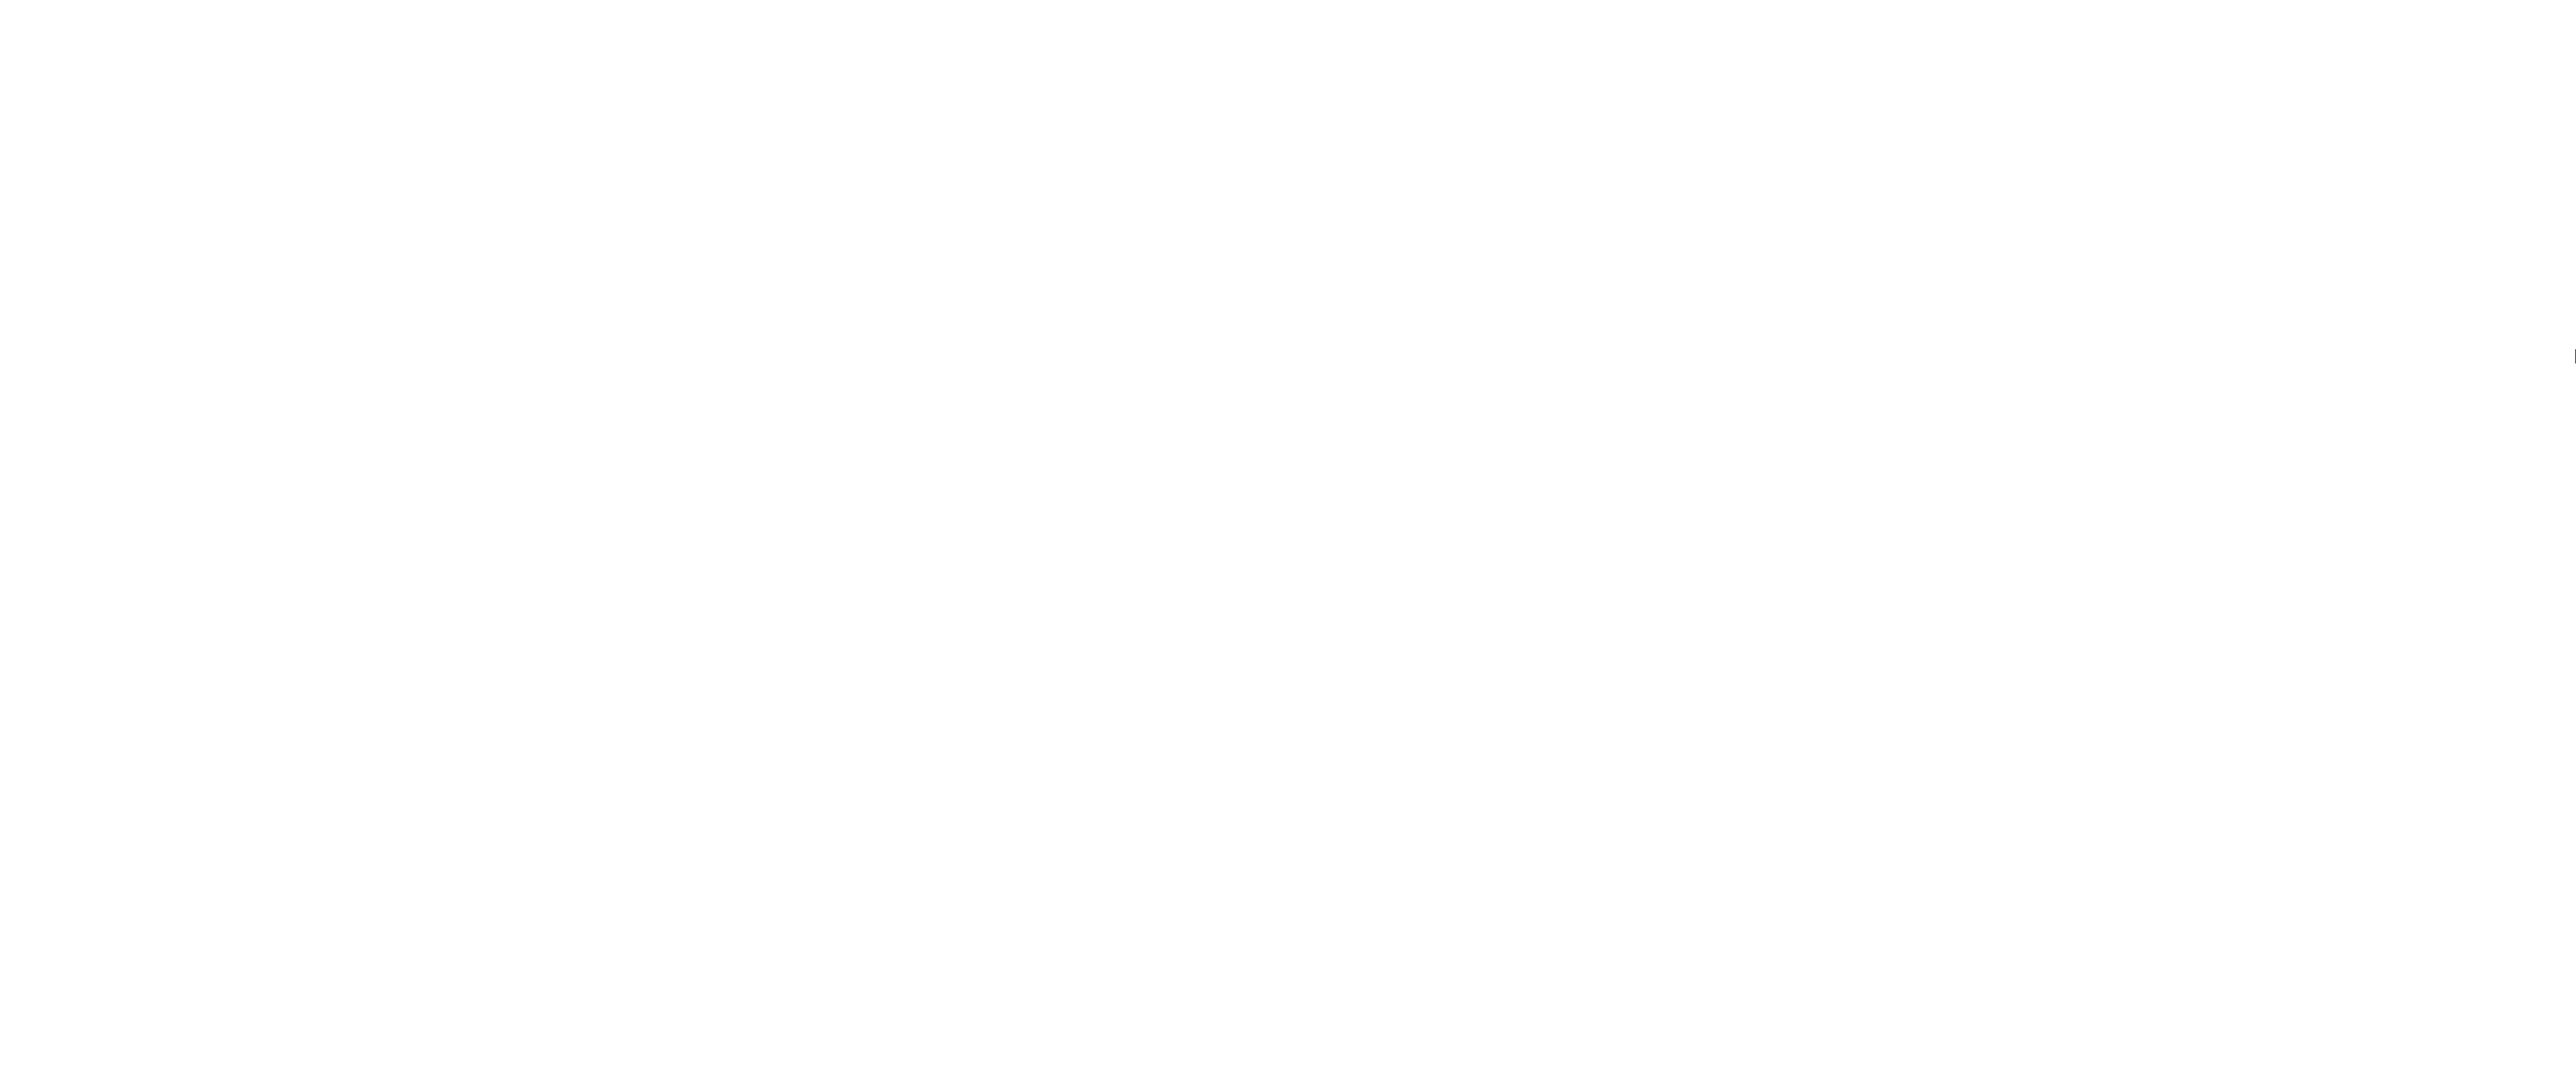 Download Eps For Print - James Madison University Logo Png White (5114x3314), Png Download